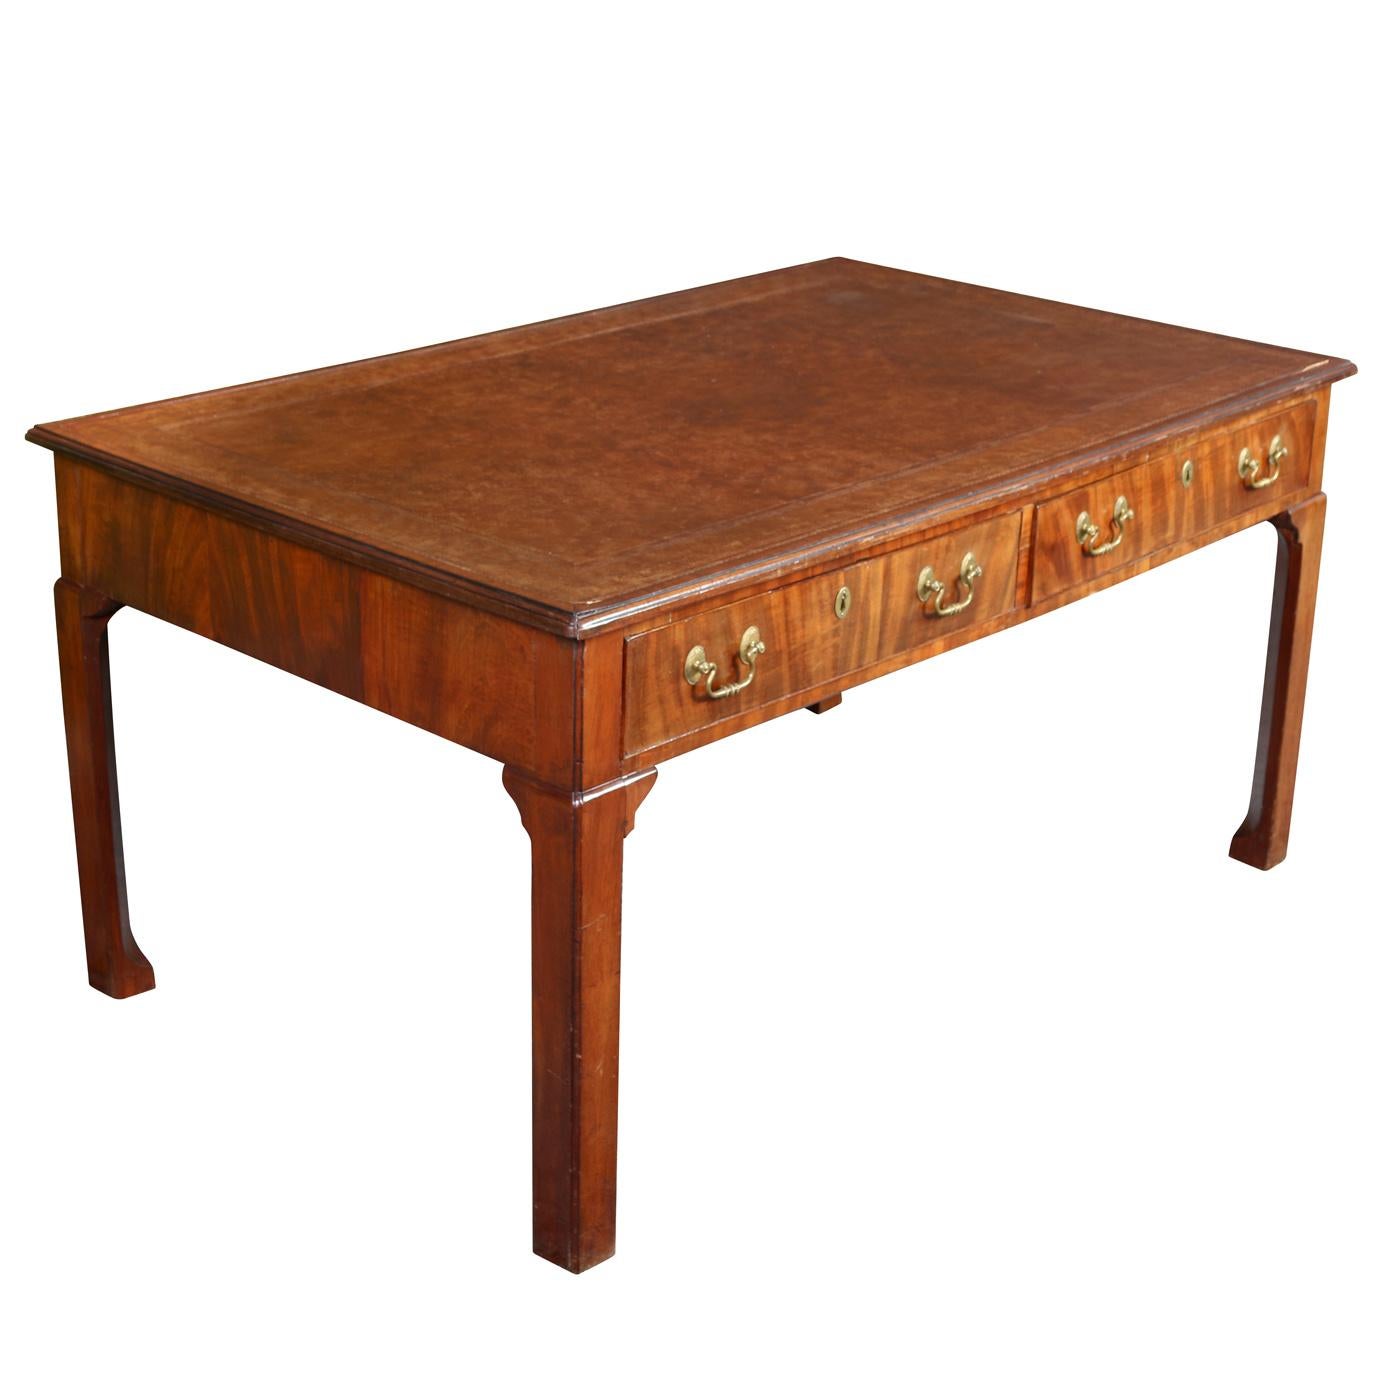 A Chippendale style writing desk with tooled brown leather top and two drawers, each with two hanging bale pulls and a single keyhole. The desk features Ming style feet, straight legs with small fretwork at the top. An elegant addition used as a